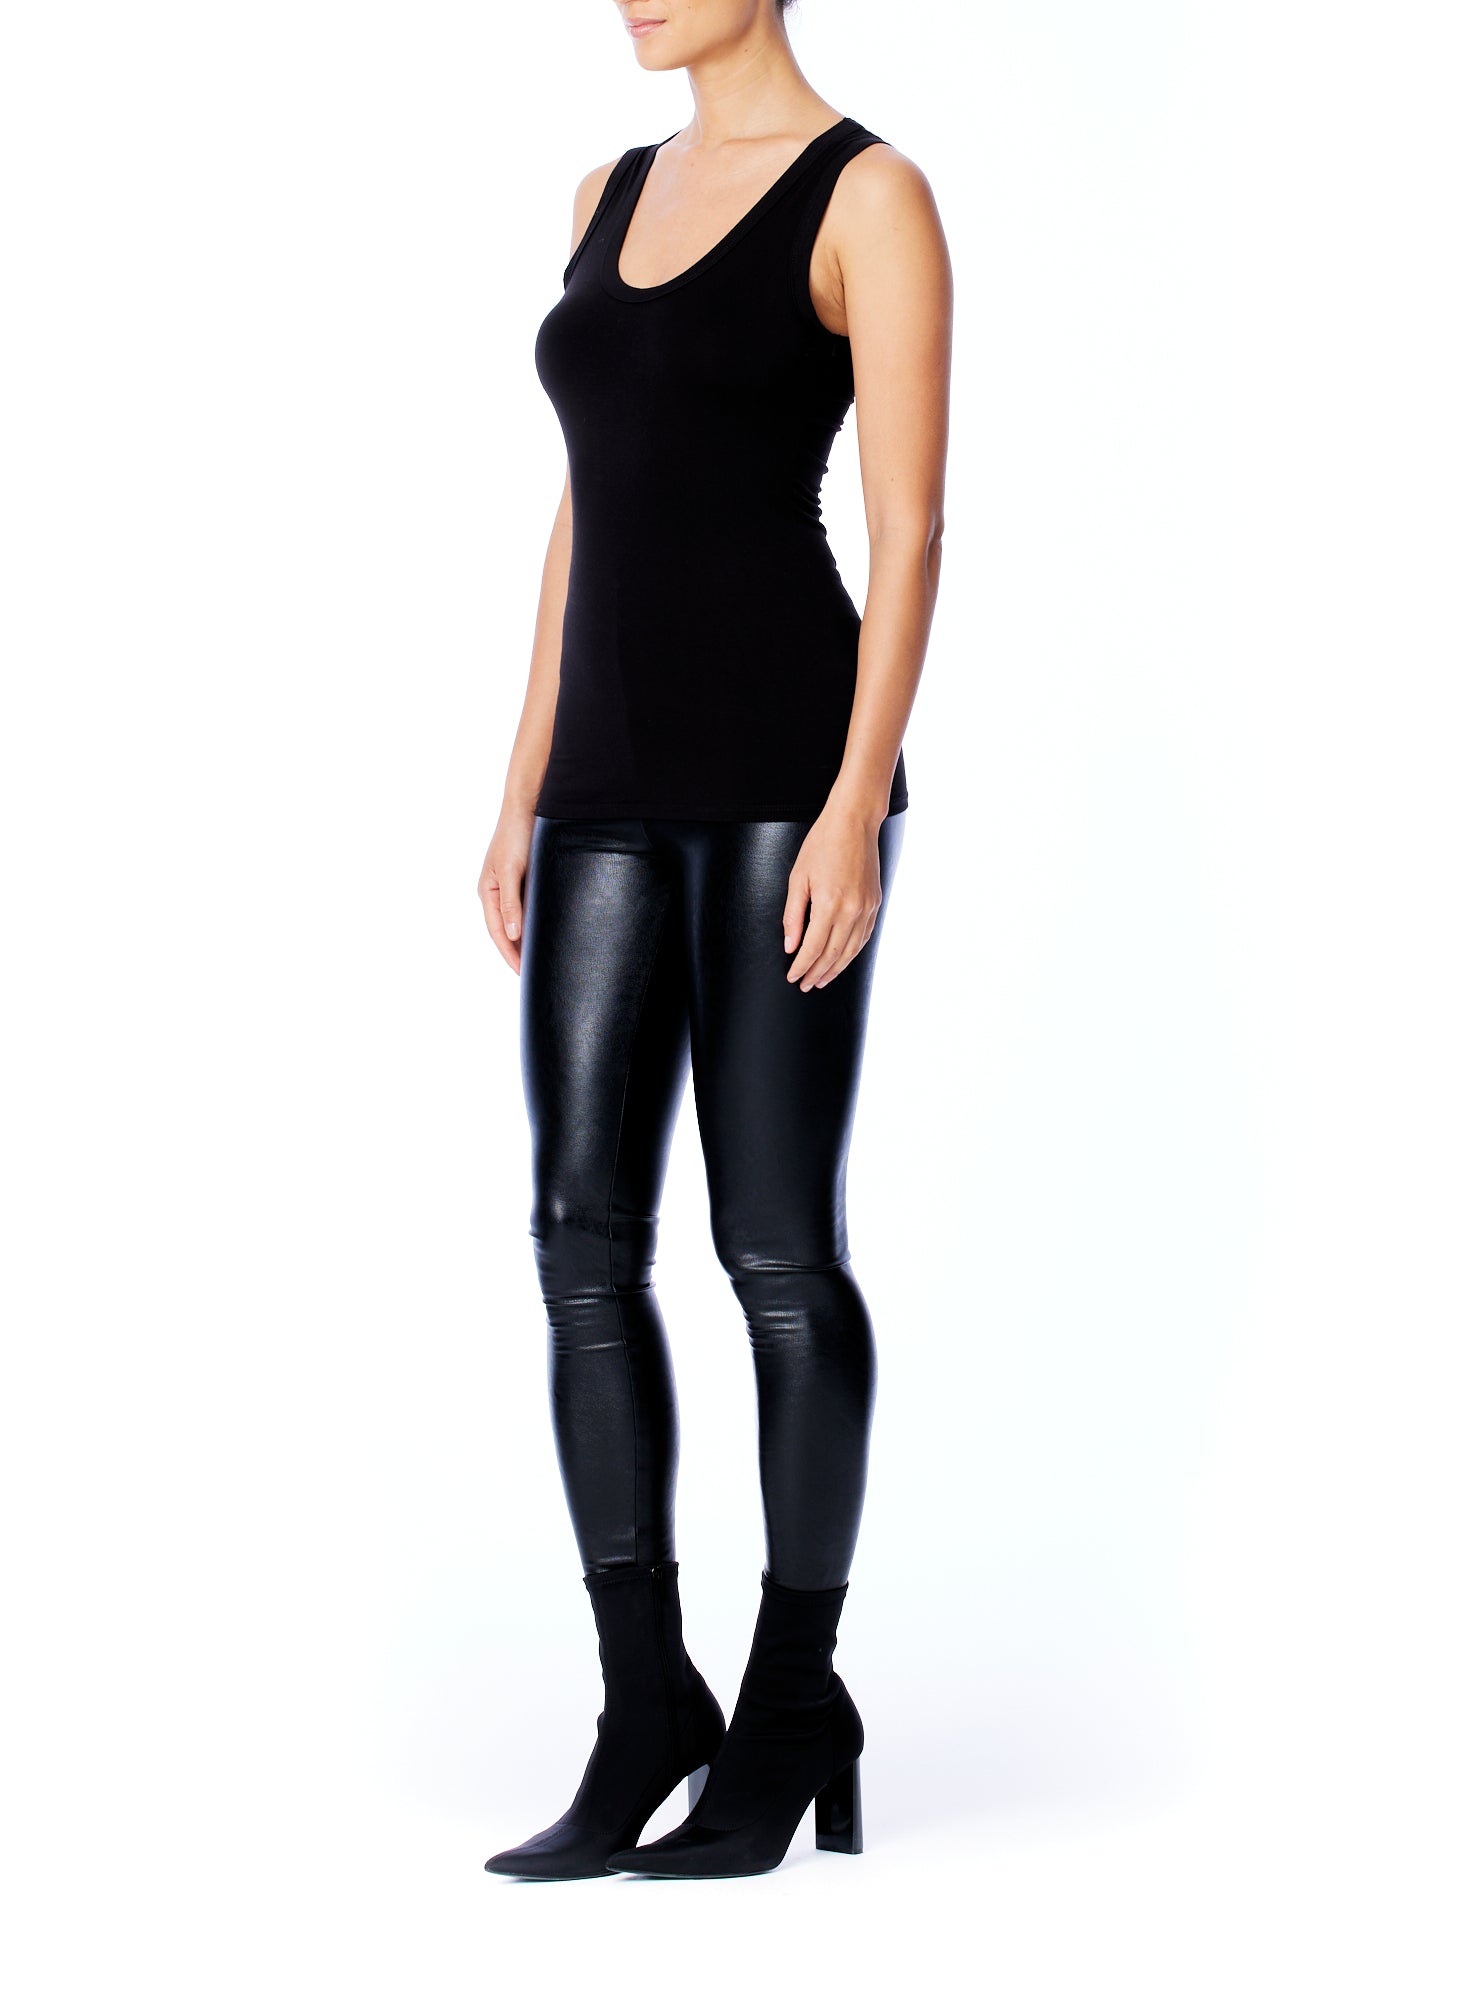 casual sleeveless, v-neck tank with and banded neckline and arm holes in black